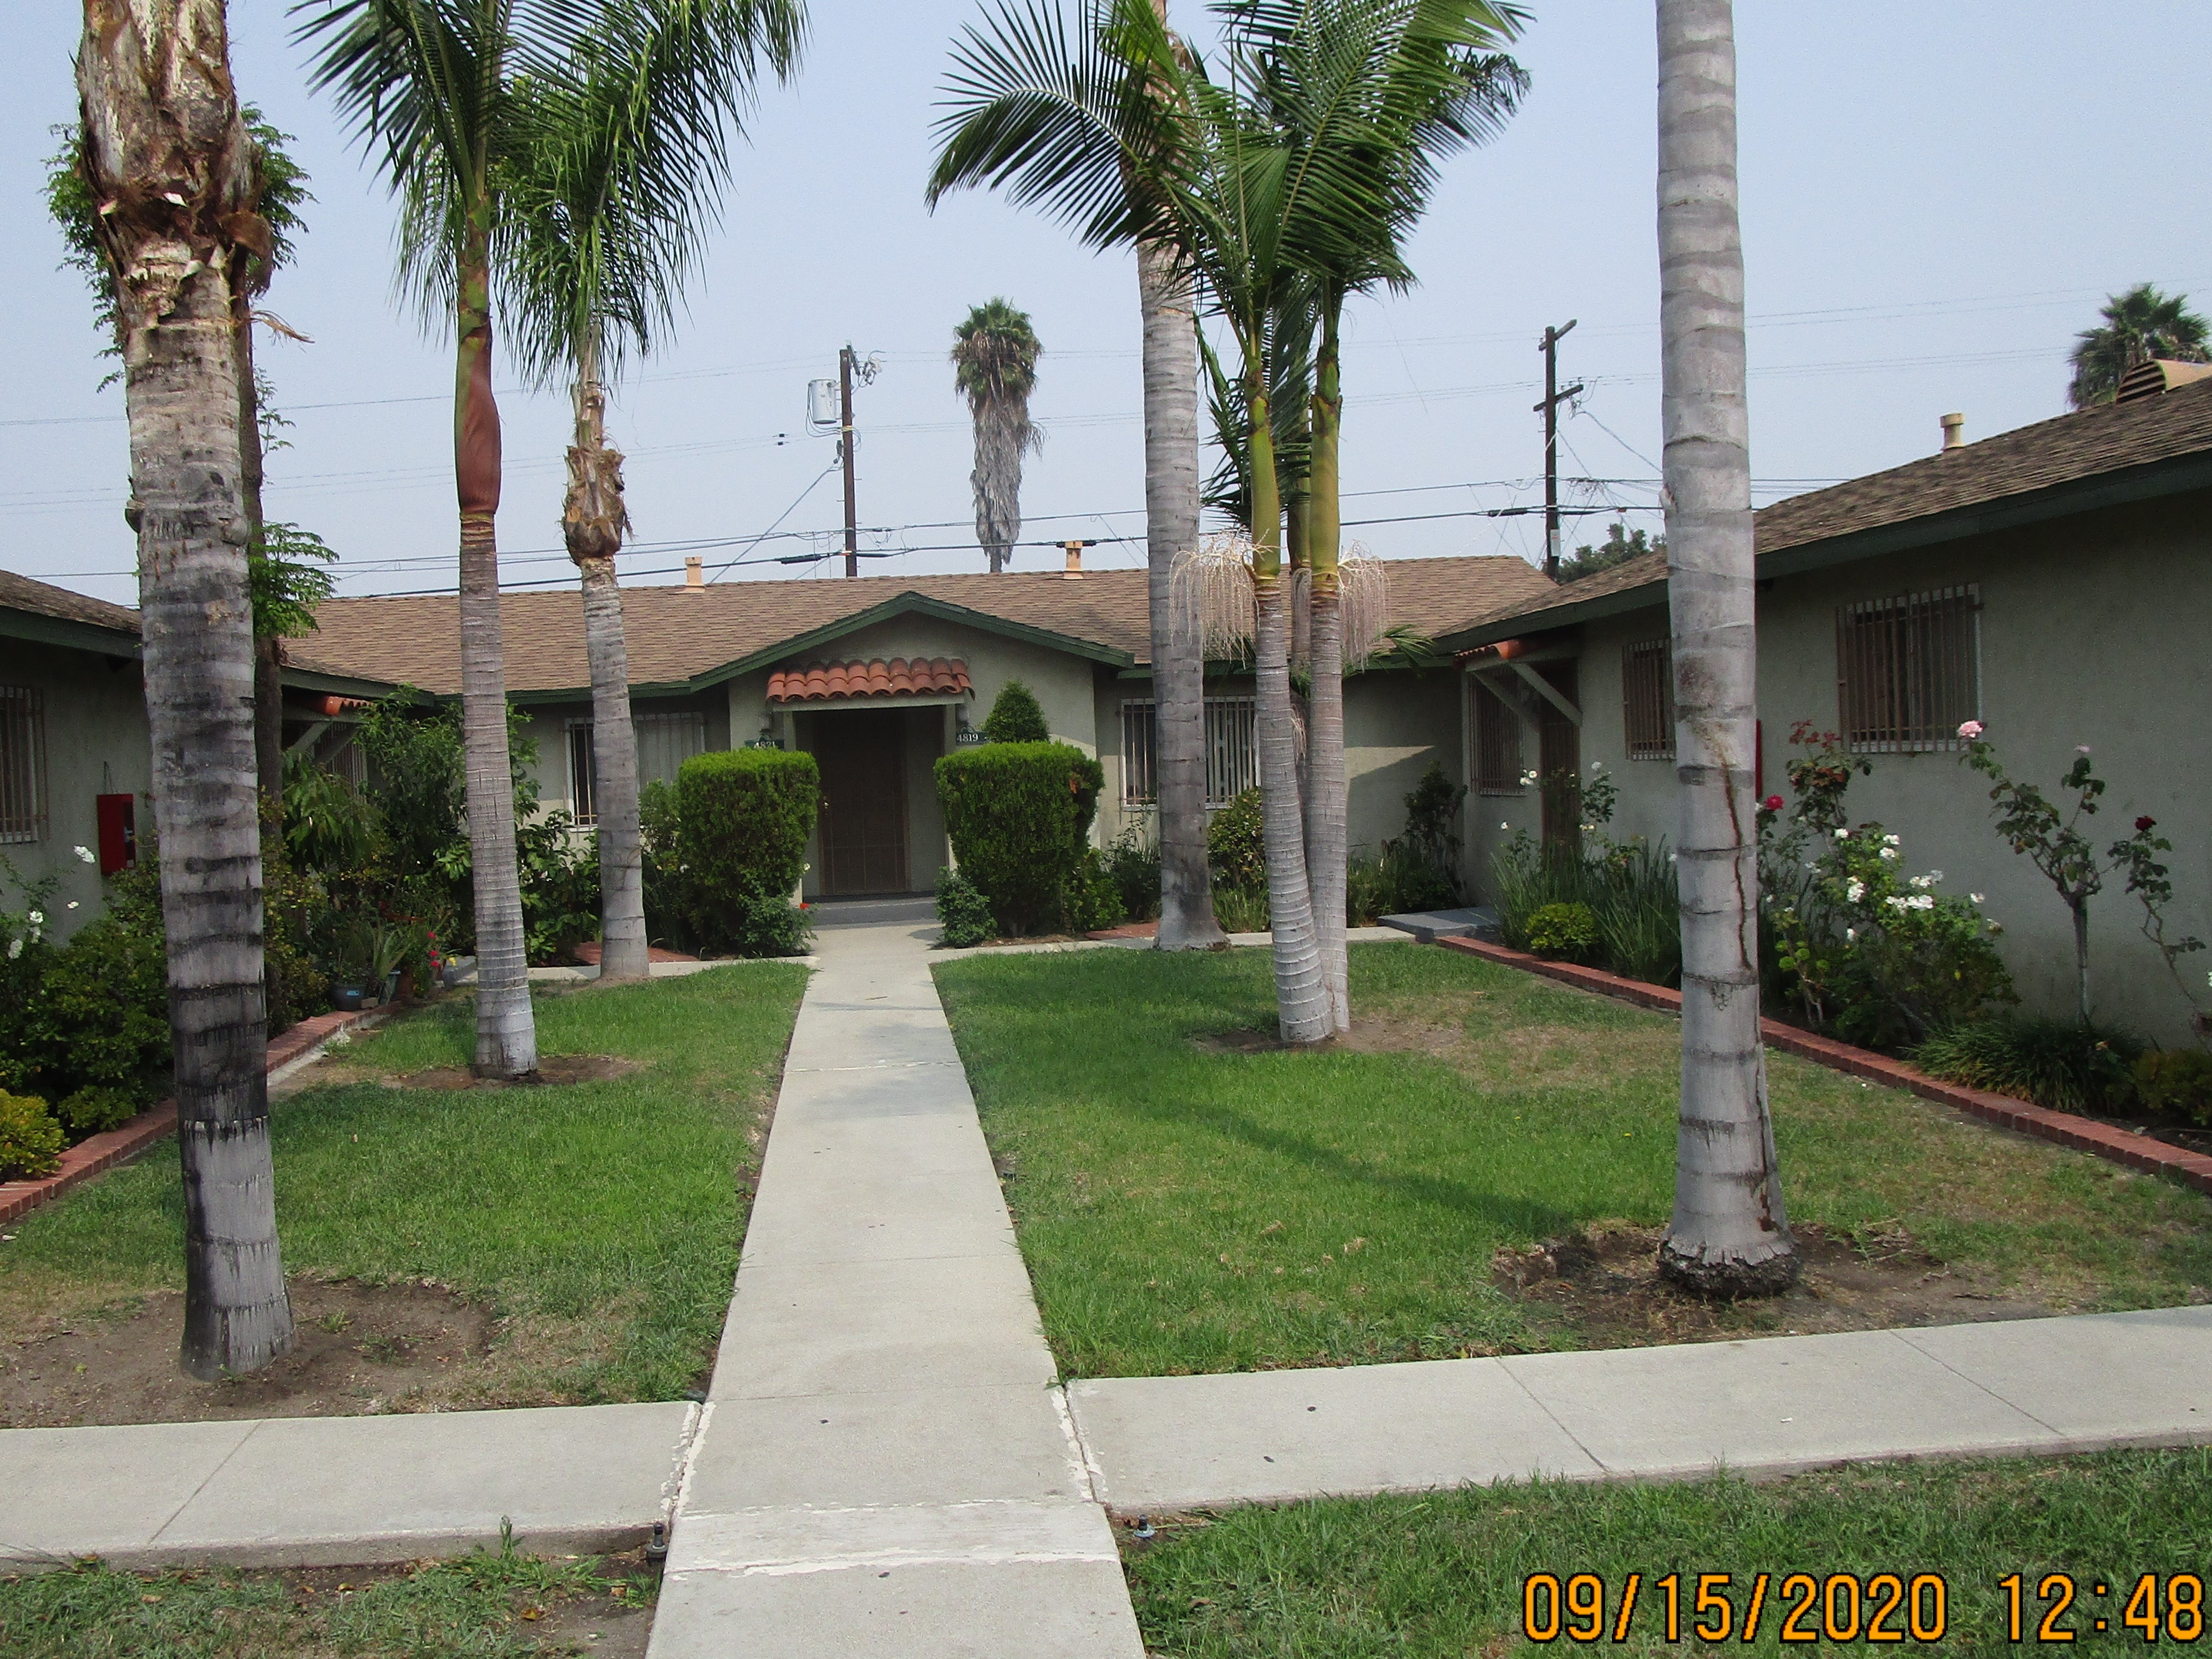 Front view of a courtyard style building, palm trees on each side, roses, plants and bushes around.